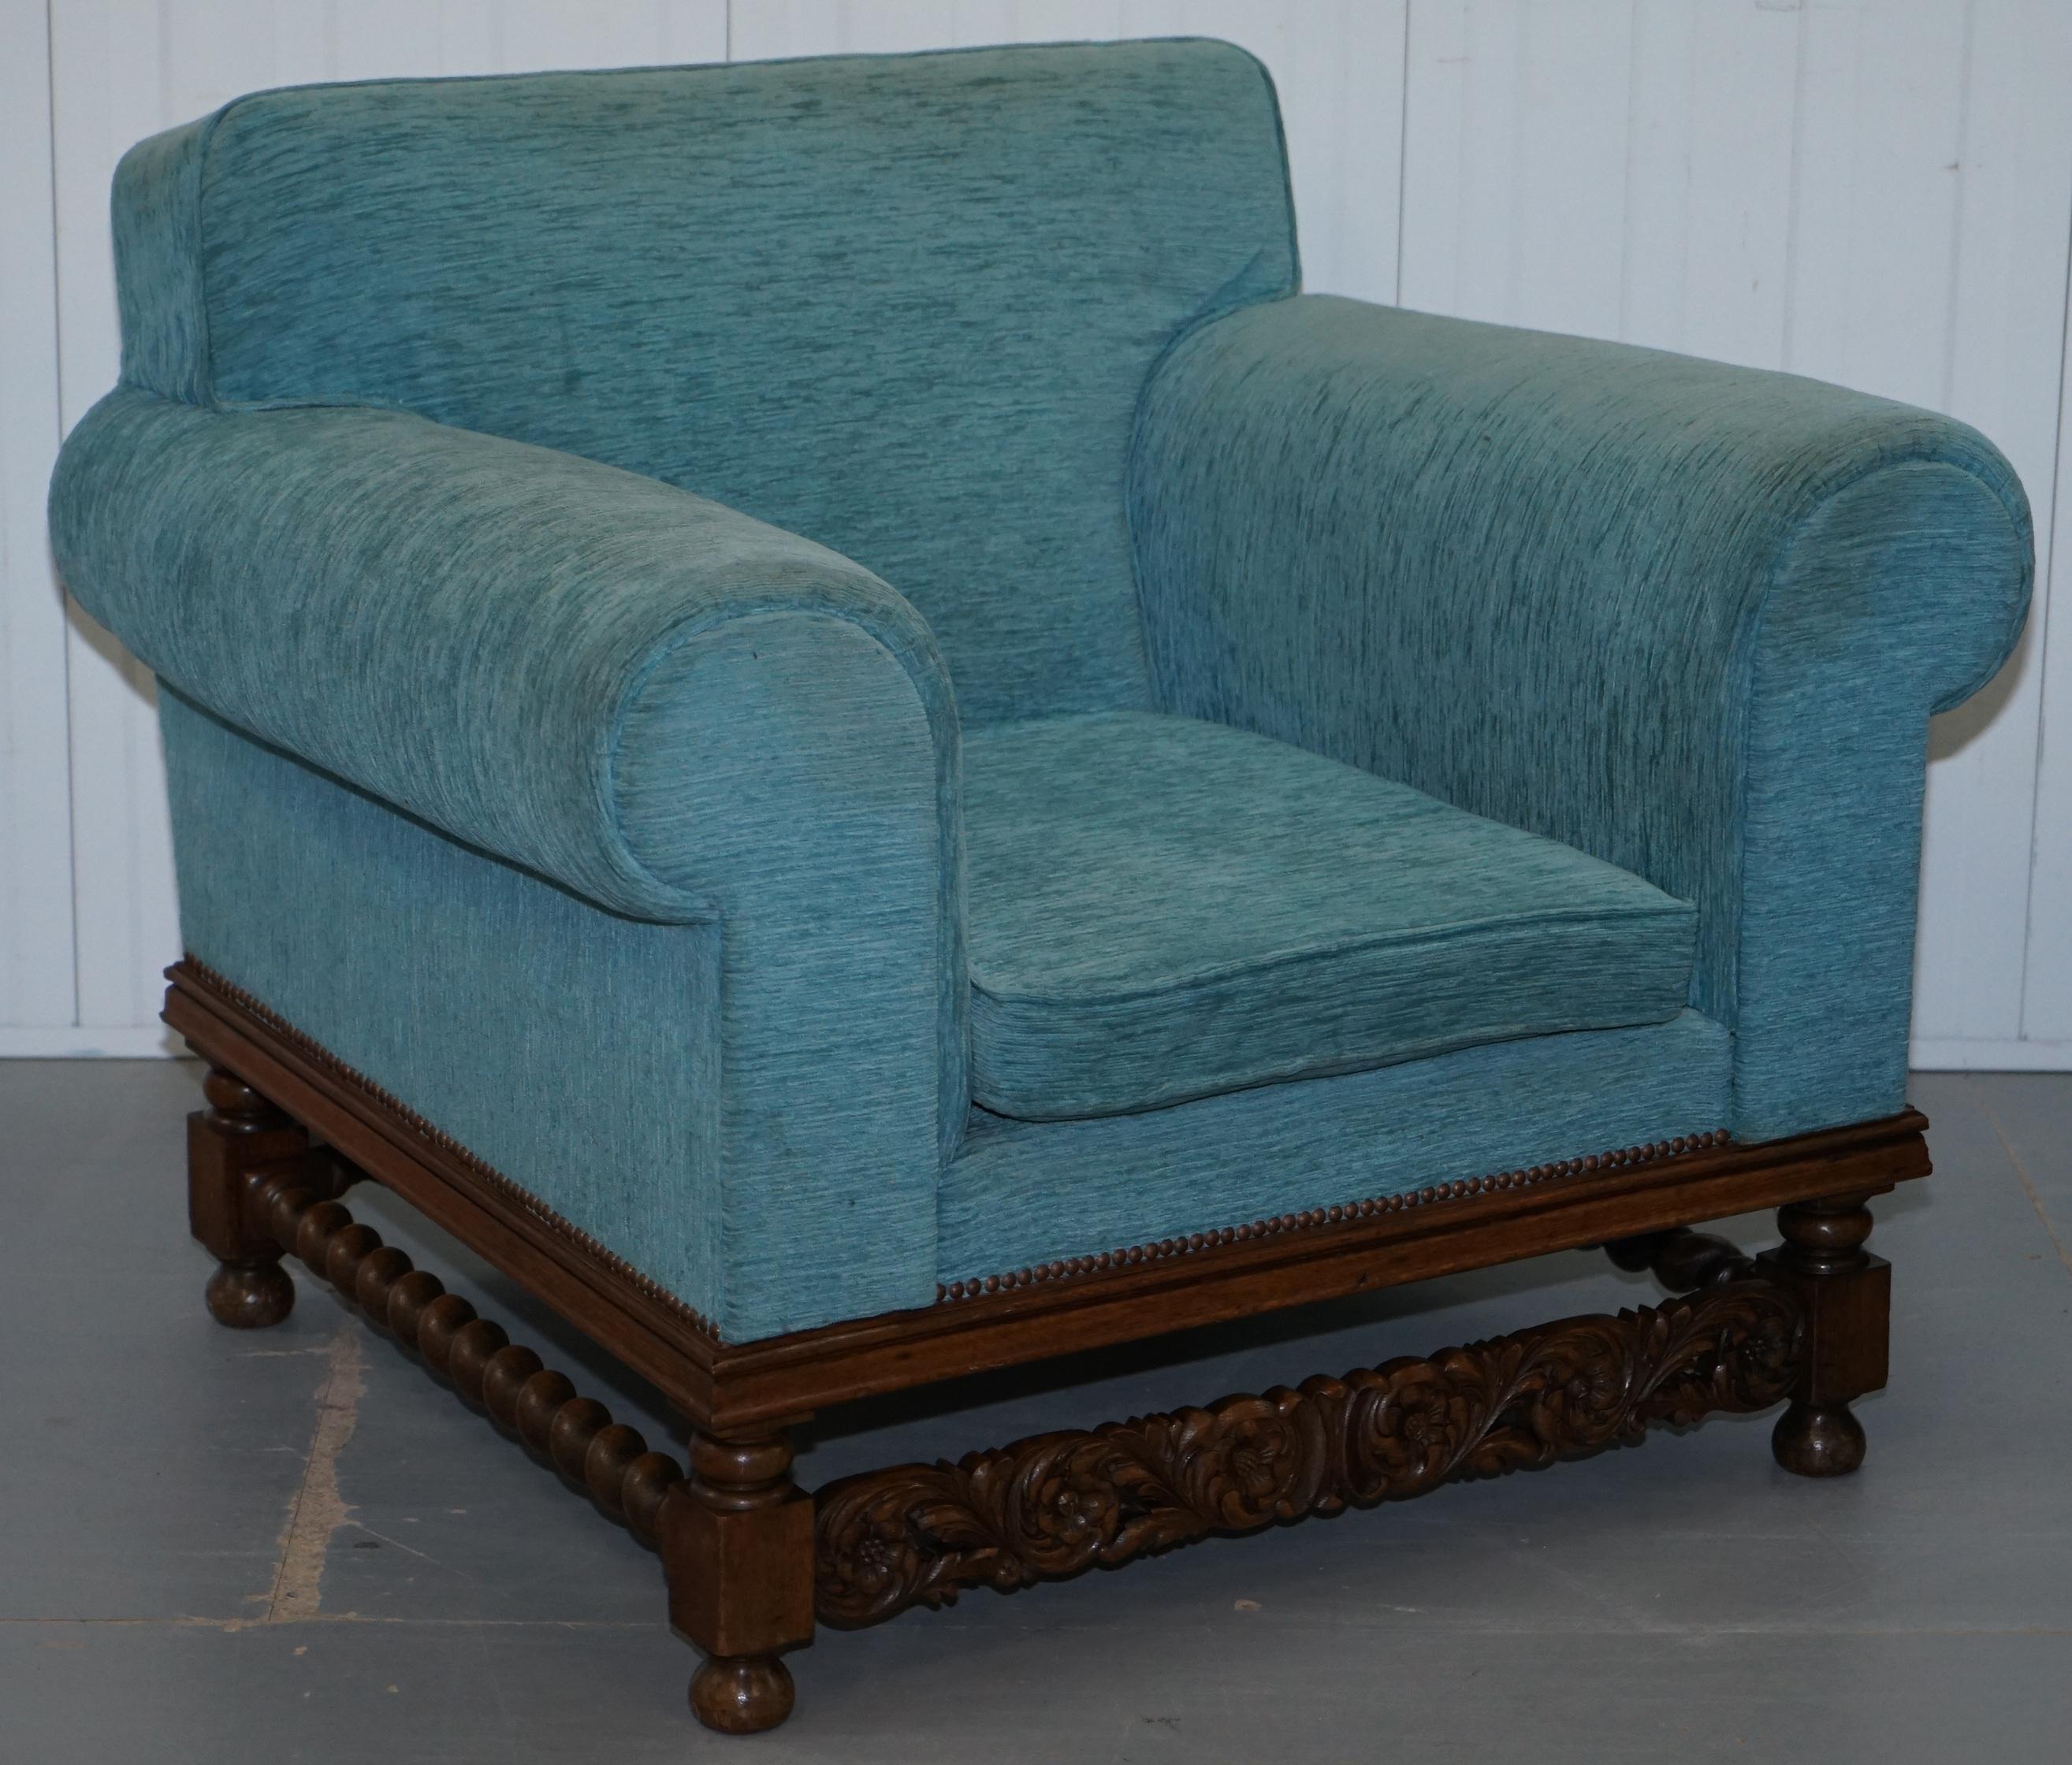 We are delighted to offer for sale this lovely pair of period Edwardian oversized gentleman’s club armchairs with barley twist oak frames

Please note the delivery fee listed is just a guide, it covers within the M25 only

An exceptionally